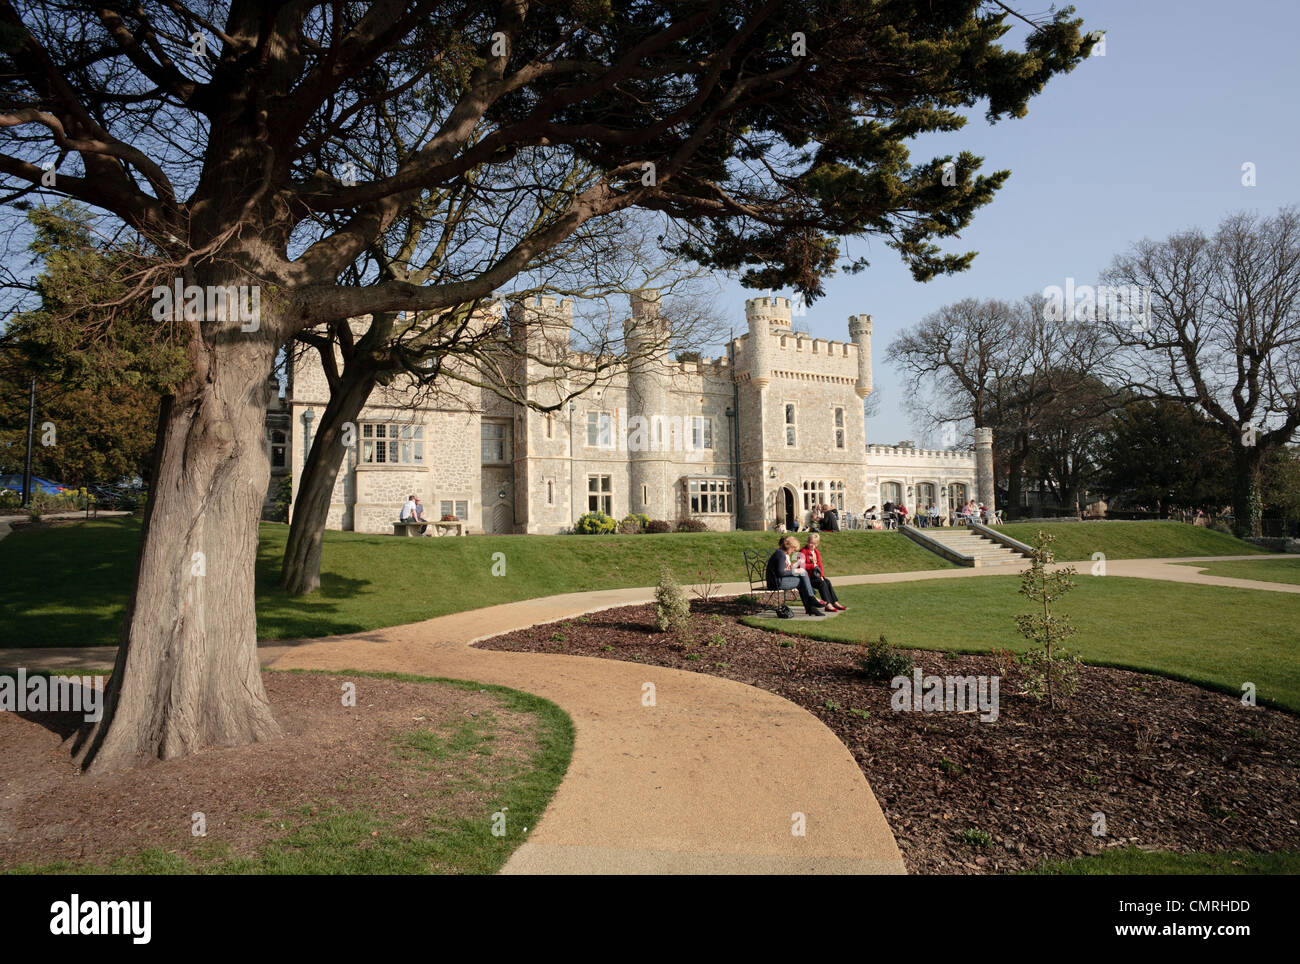 Public park and grounds in a popular Kent seaside town once a private home called Tankerton Towers now called a Castle Stock Photo